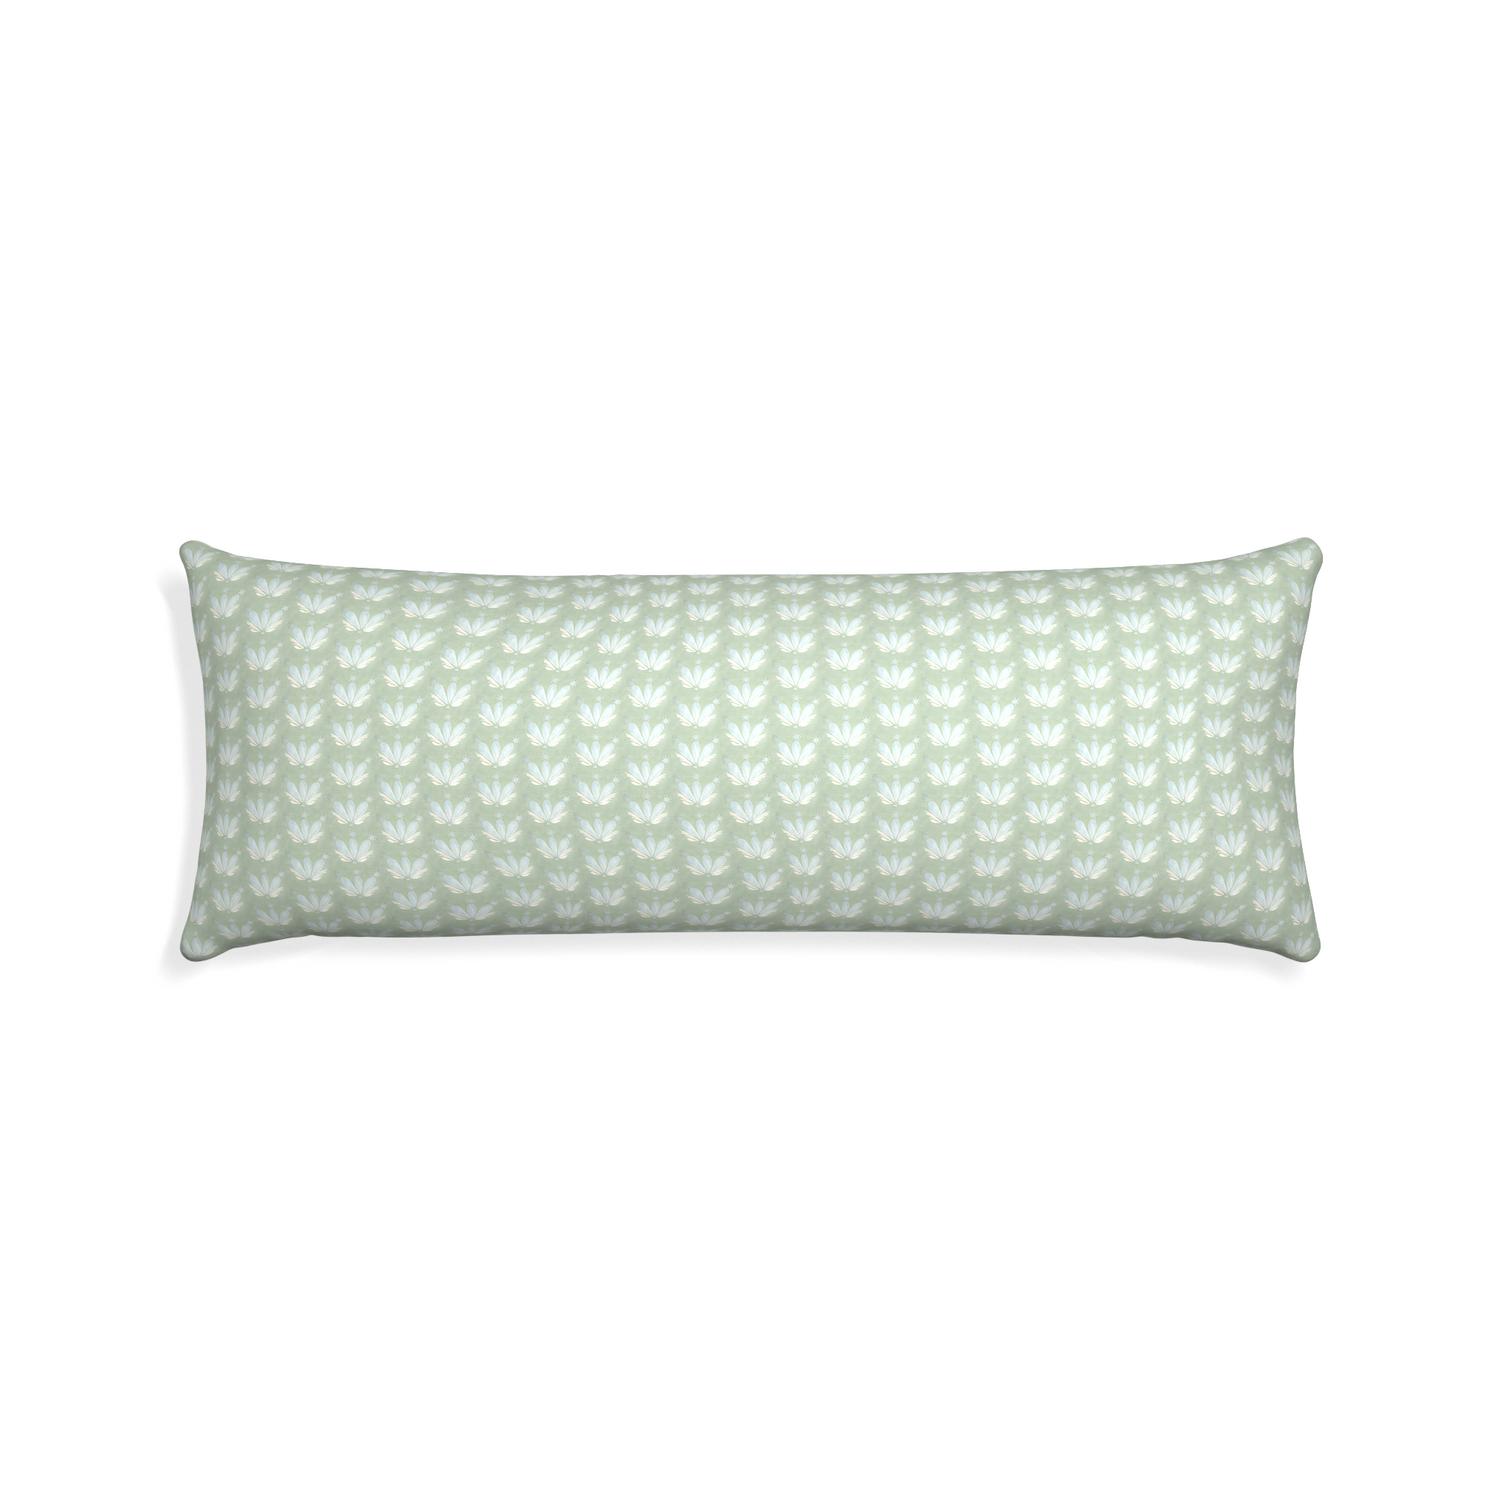 Xl-lumbar serena sea salt custom blue & green floral drop repeatpillow with none on white background